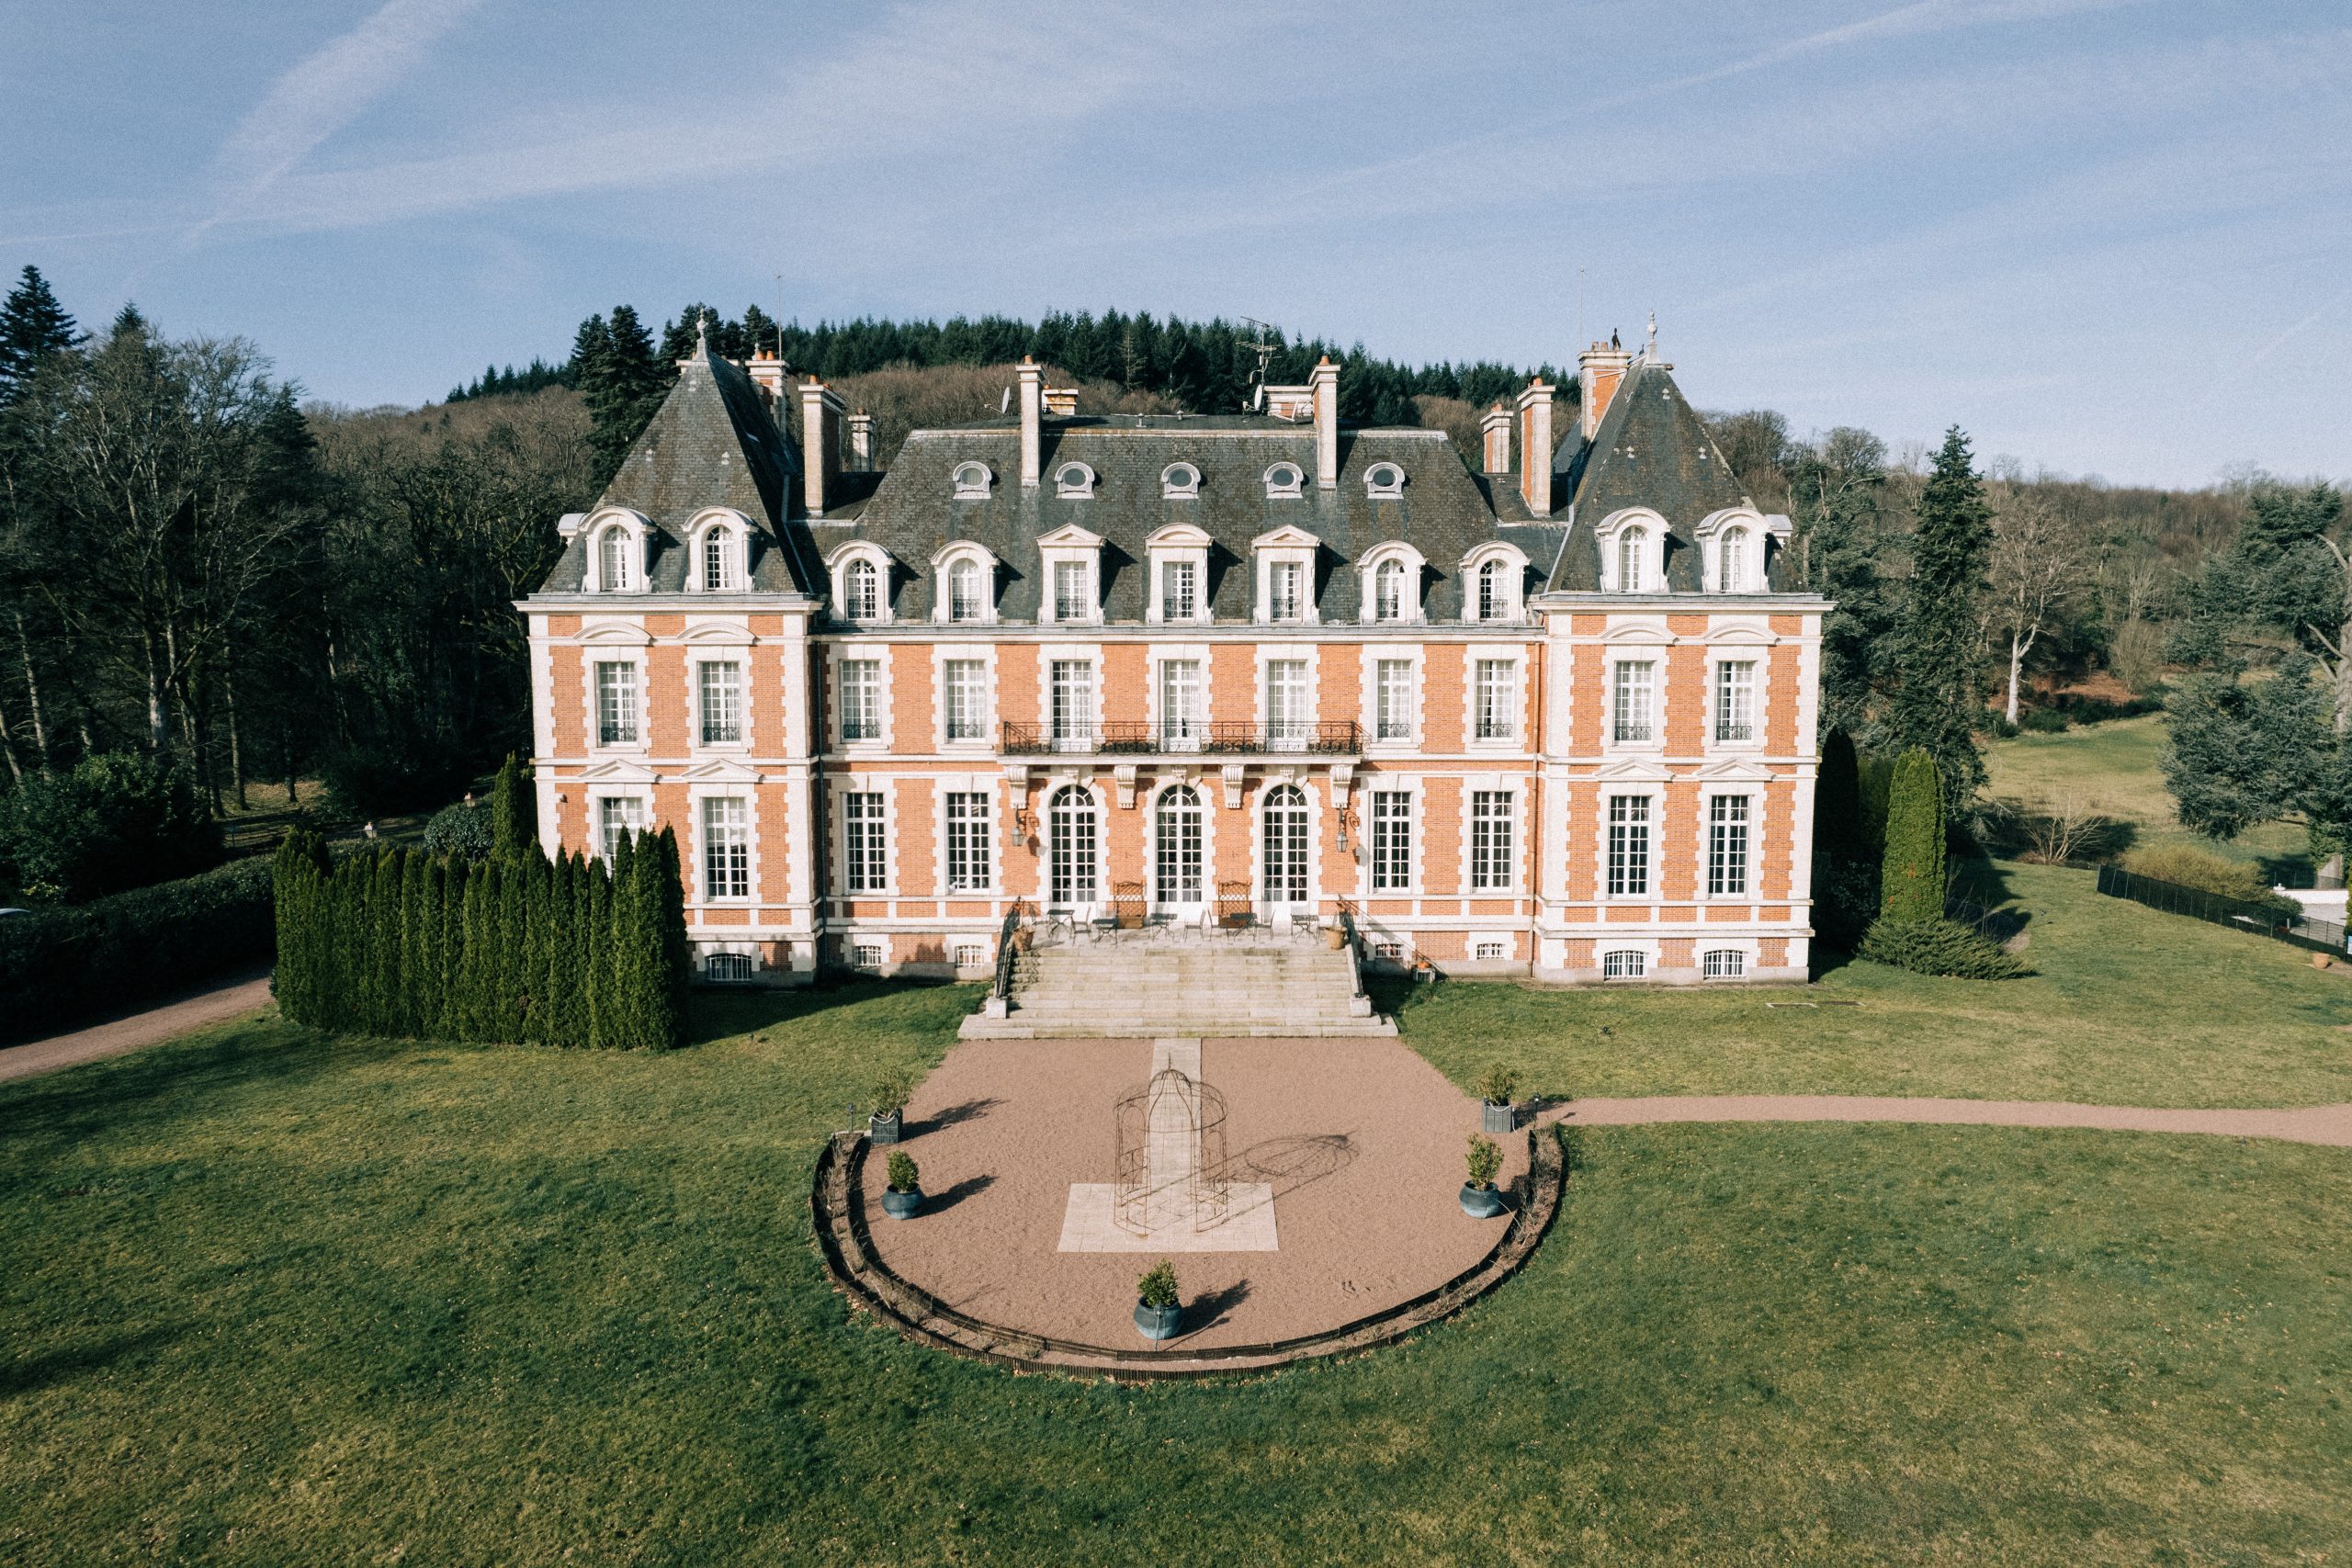 Chateau de la Cazine wedding venue in France listed on Tie The Knot Wedding Directory